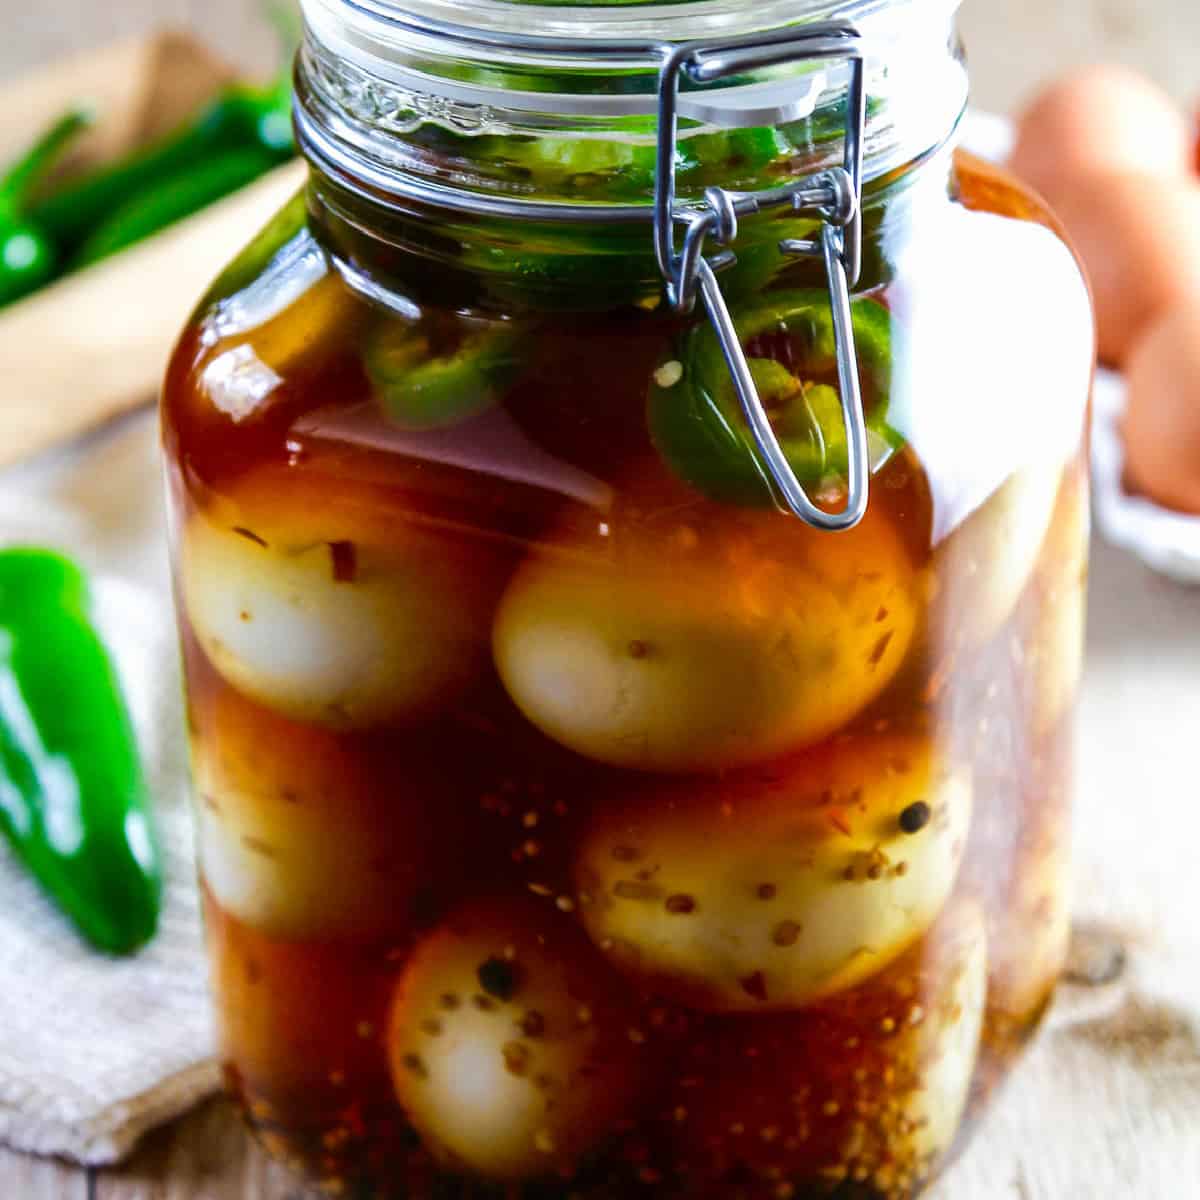 A large glass clamp jar filled with pickled eggs, fresh jalapeno slices, and spices.